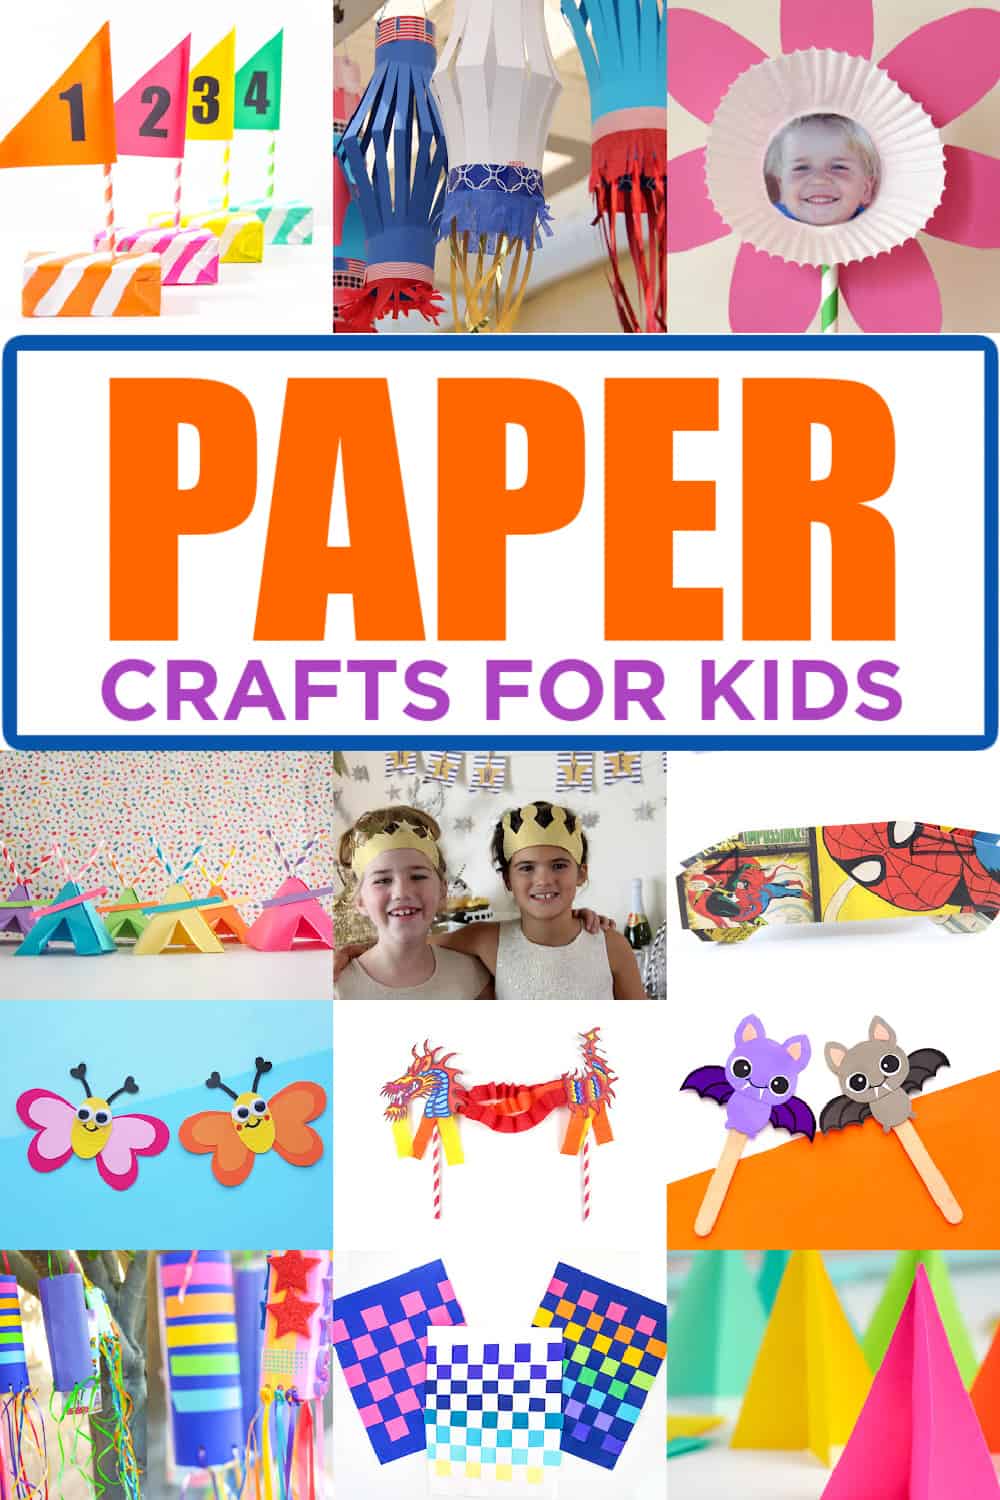 Birthday Party Craft Ideas To Make Your Kid's Day Special, DIY Projects